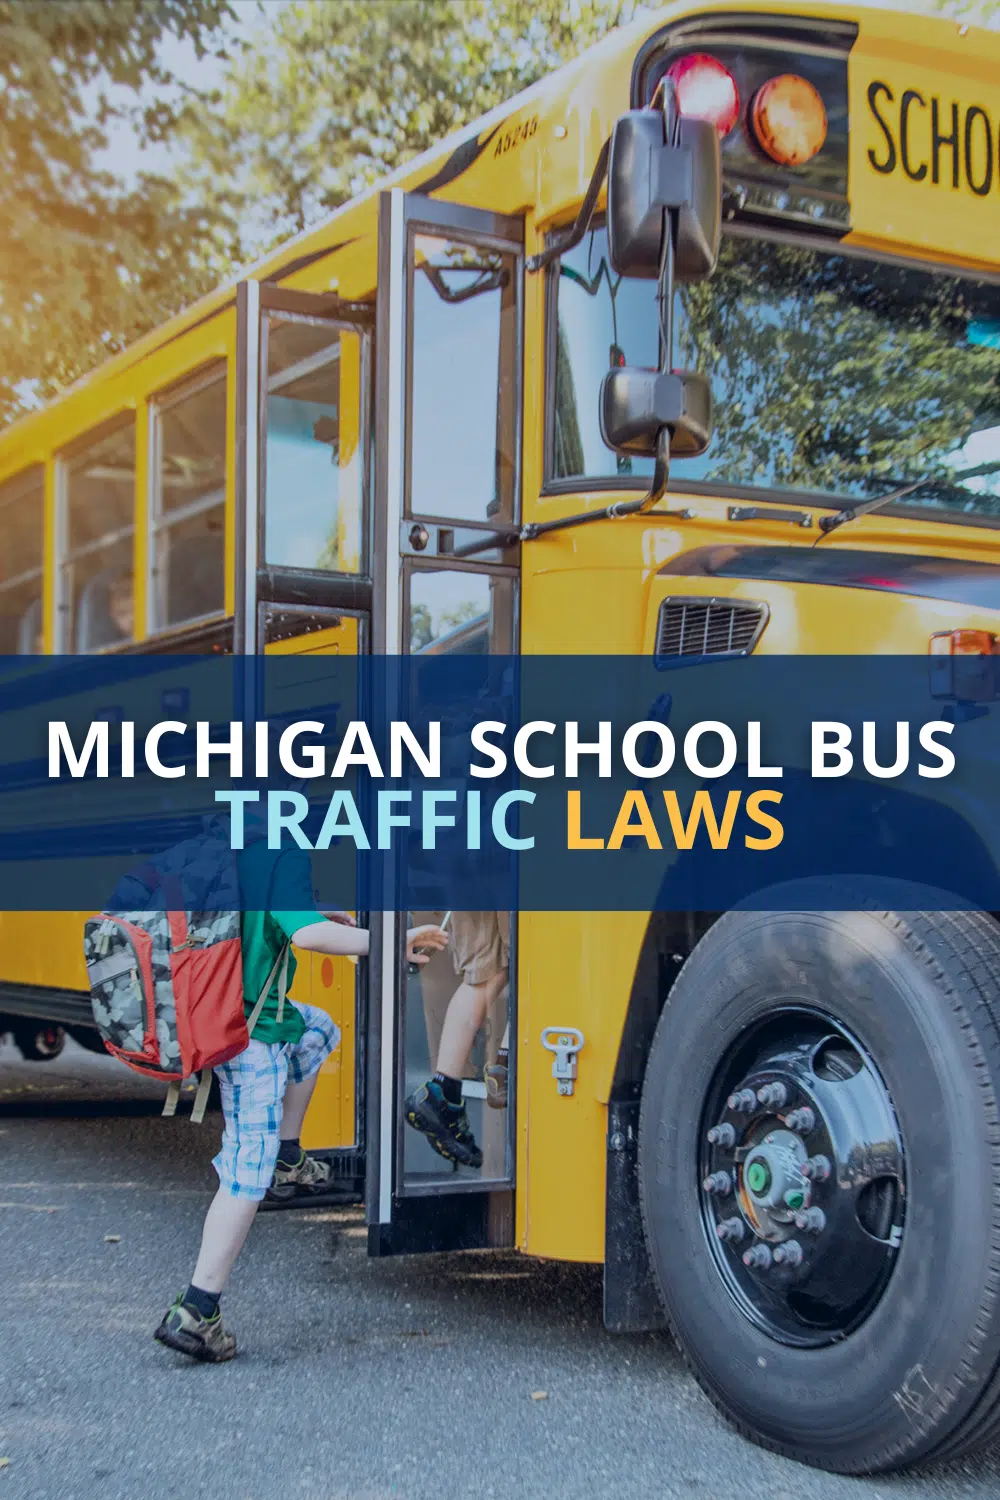 Michigan School Bus Traffic Laws: What You Need To Know